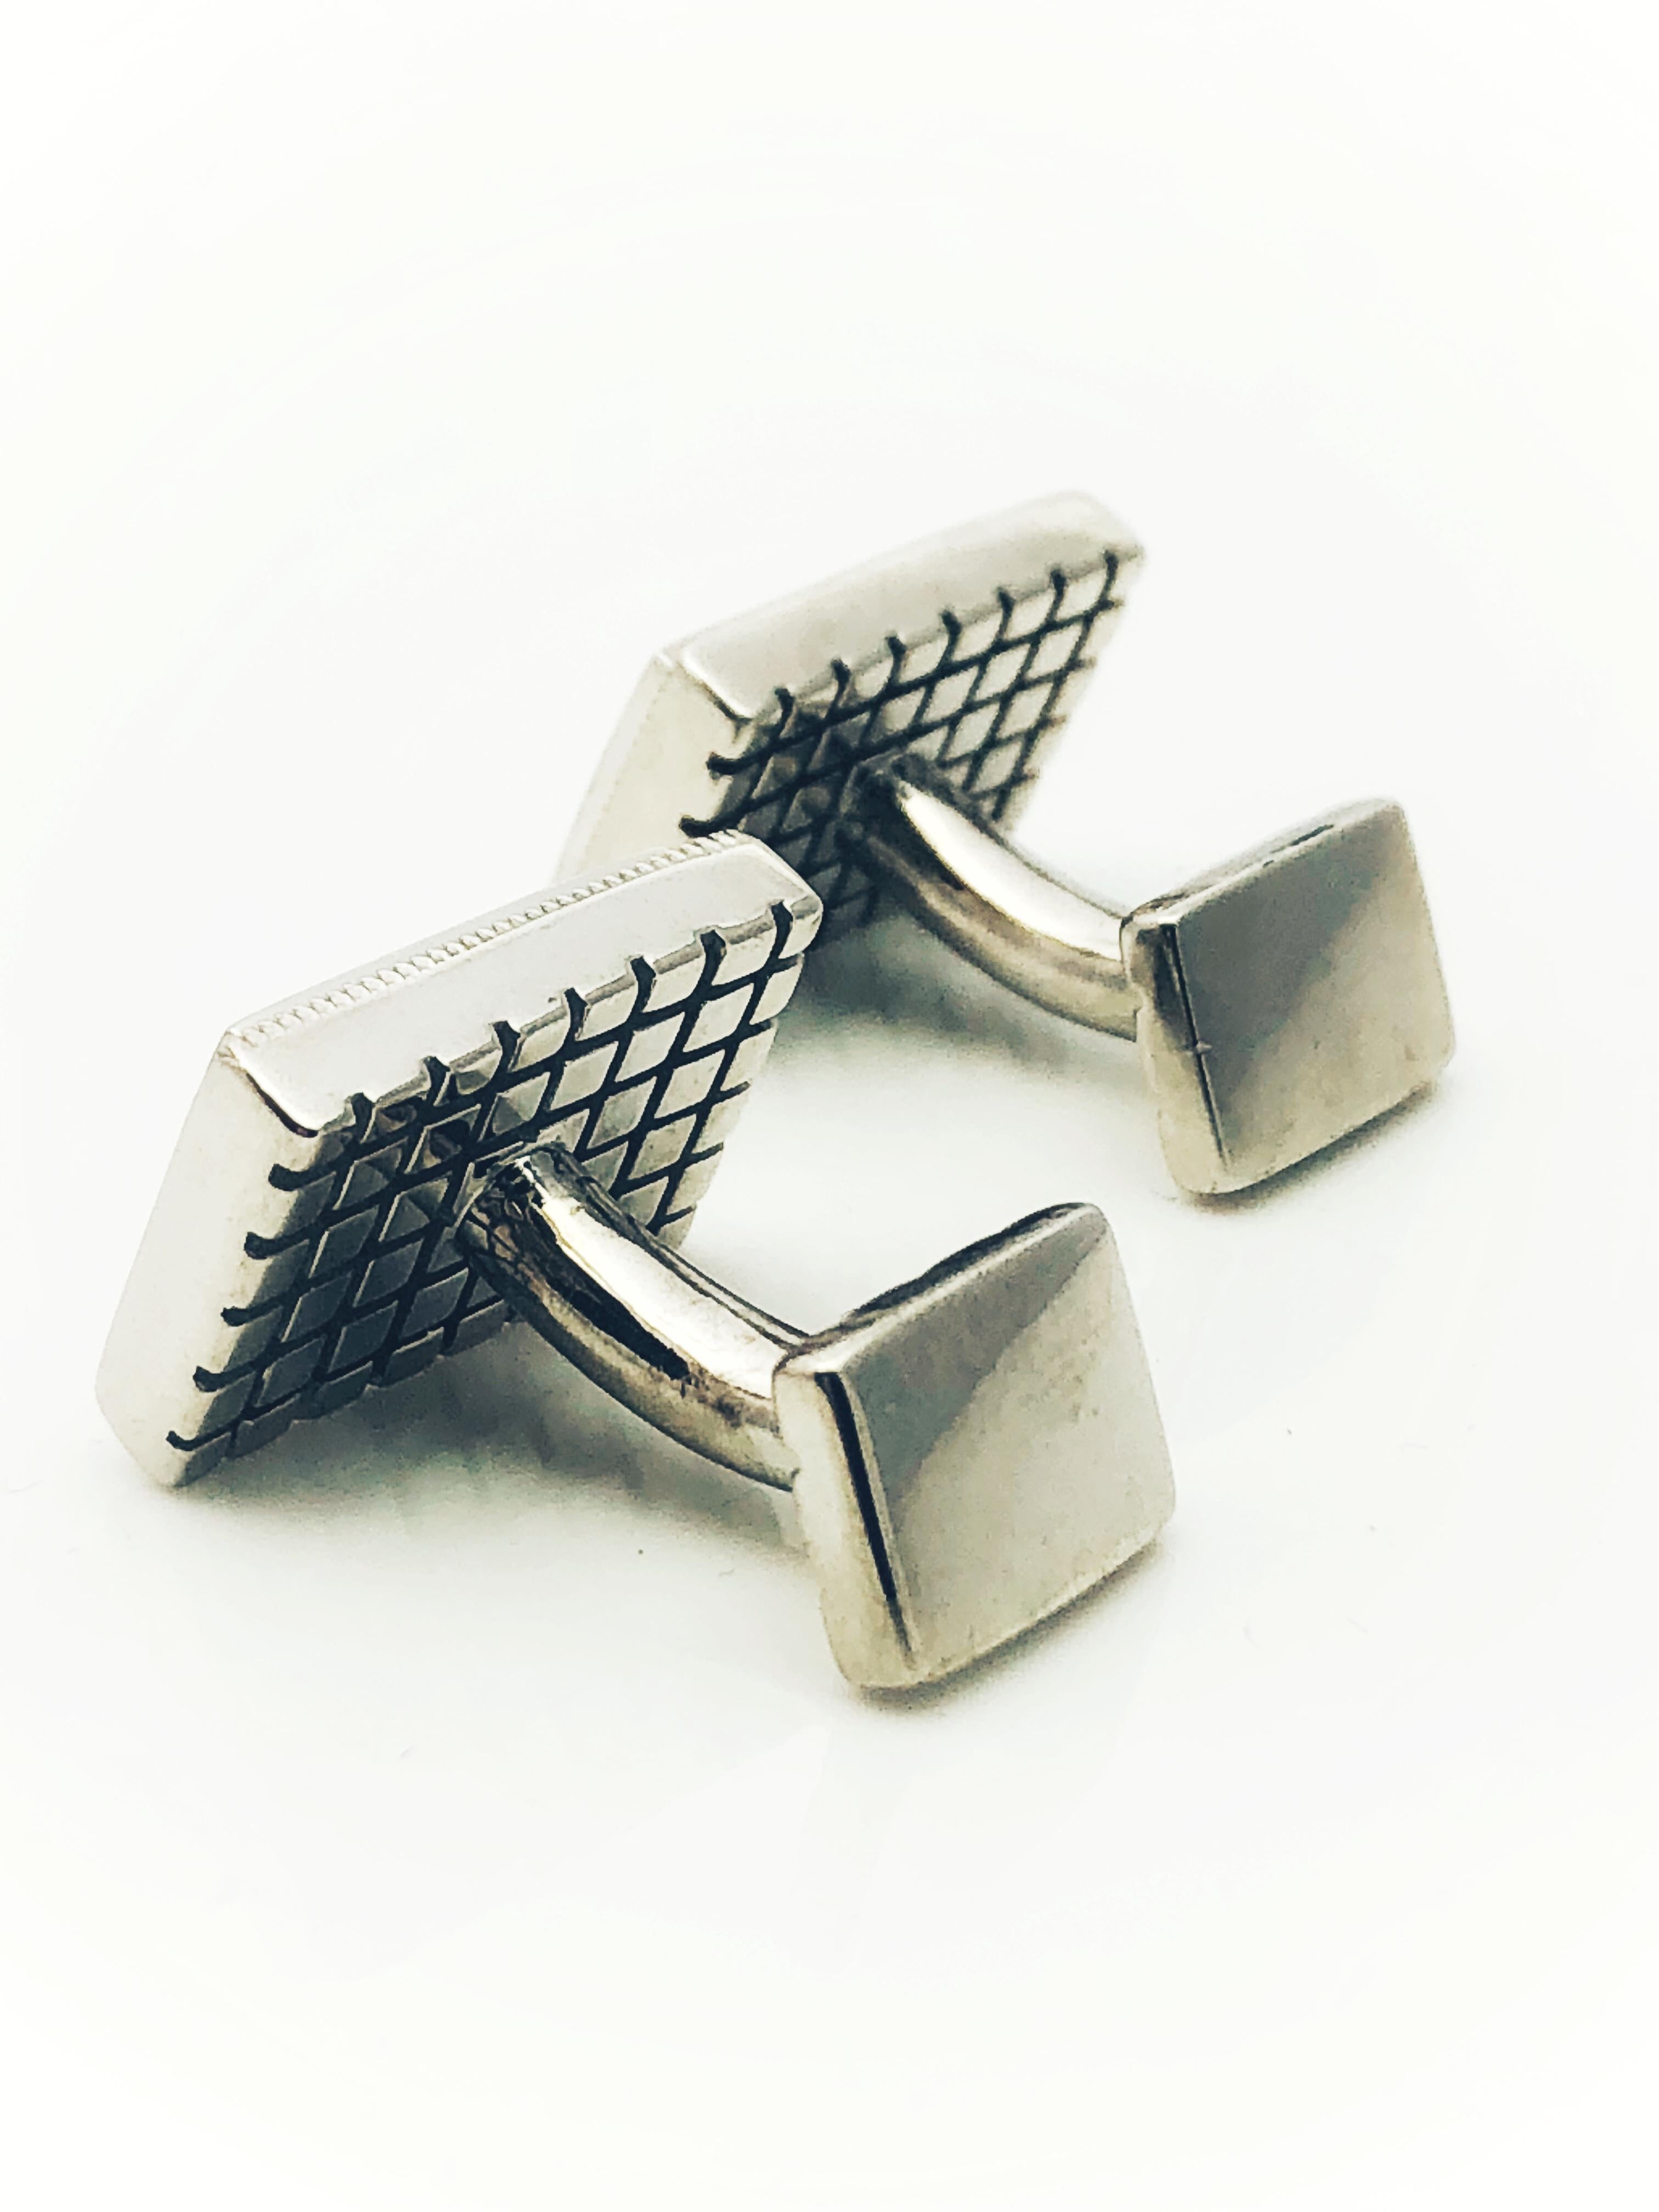 Contemporary Sterling Silver Rectangular Engrave-Able Cufflinks